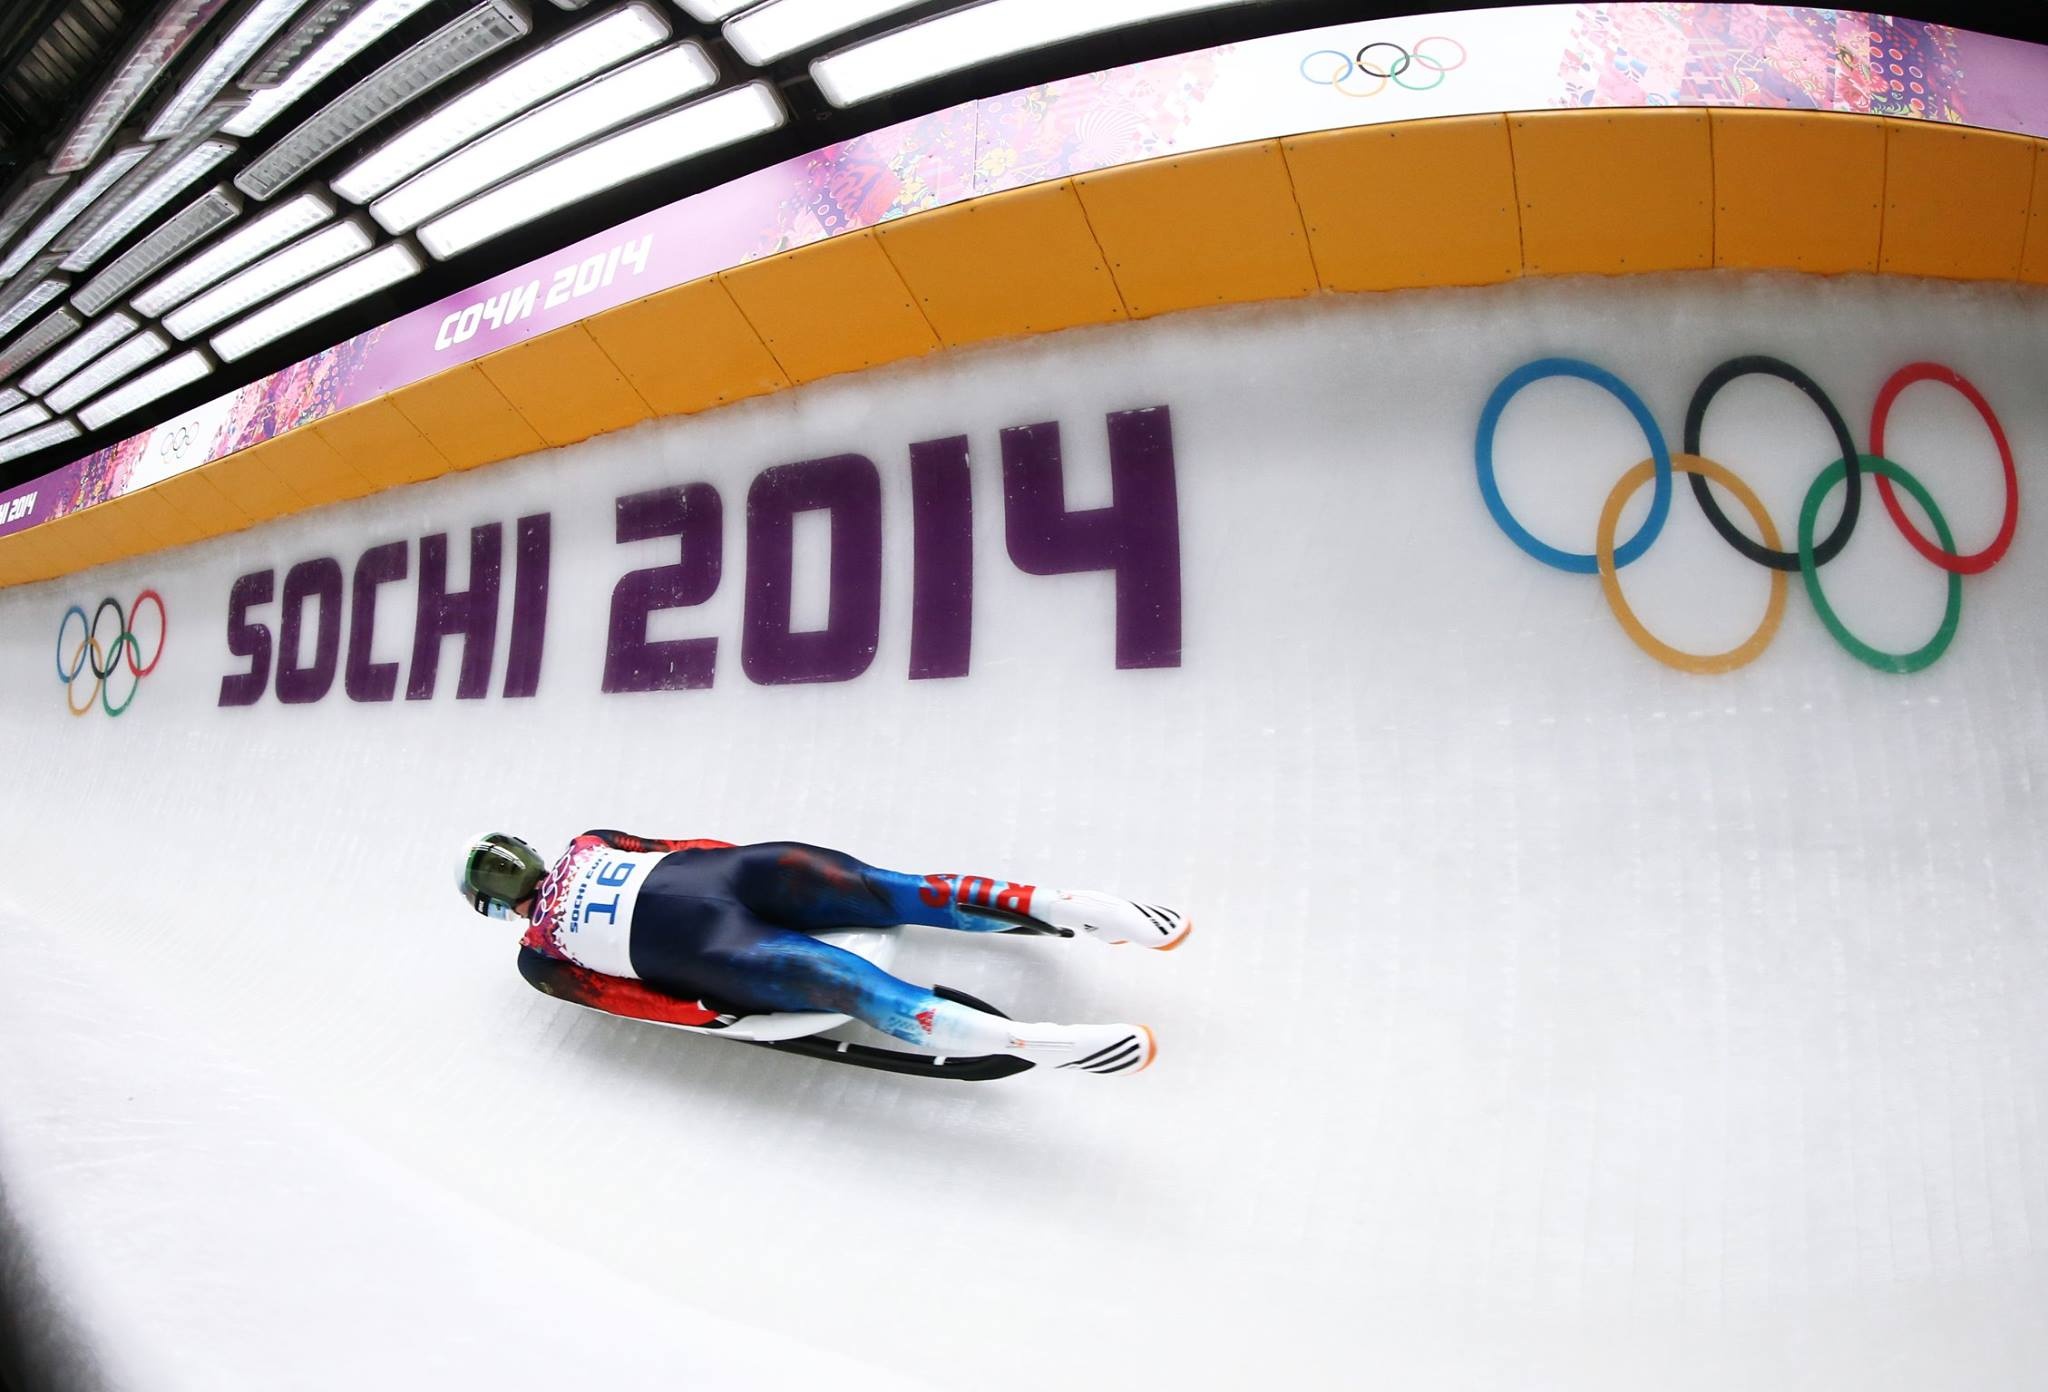 Luge: A Russian luger competes at the 2014 Sochi Winter Olympics singles event. 2050x1400 HD Wallpaper.